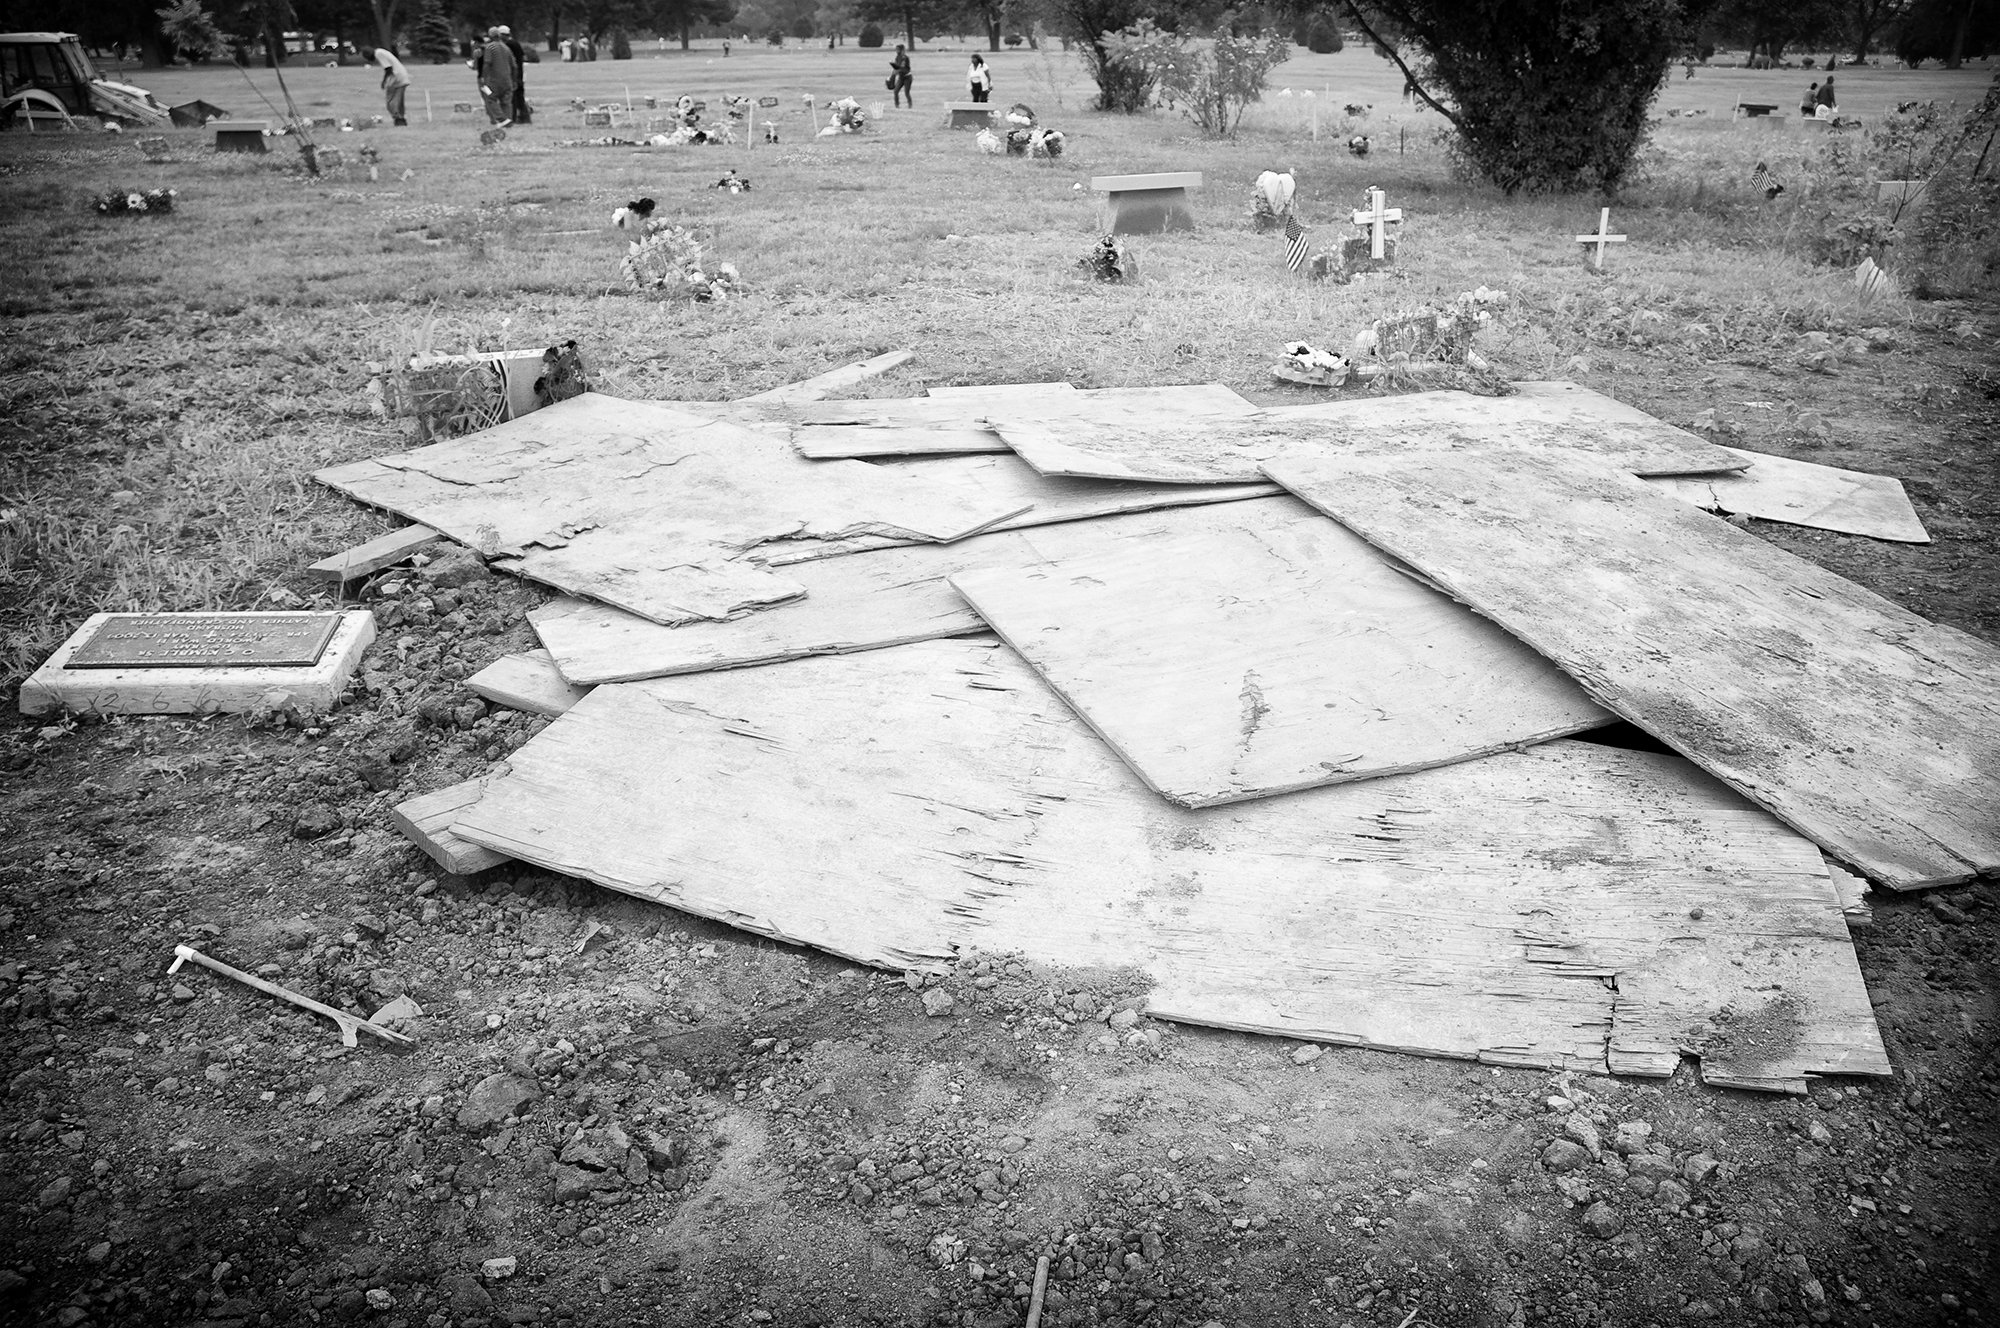  On Wednesday July 8th, 2009, the Cook County Sheriff’s Department raided the historic Burr Oak Cemetery in Alsip, Illinois.&nbsp;Six weeks earlier, the Sheriff’s Department began investigating unsettling and macabre allegations: the cemetery manager